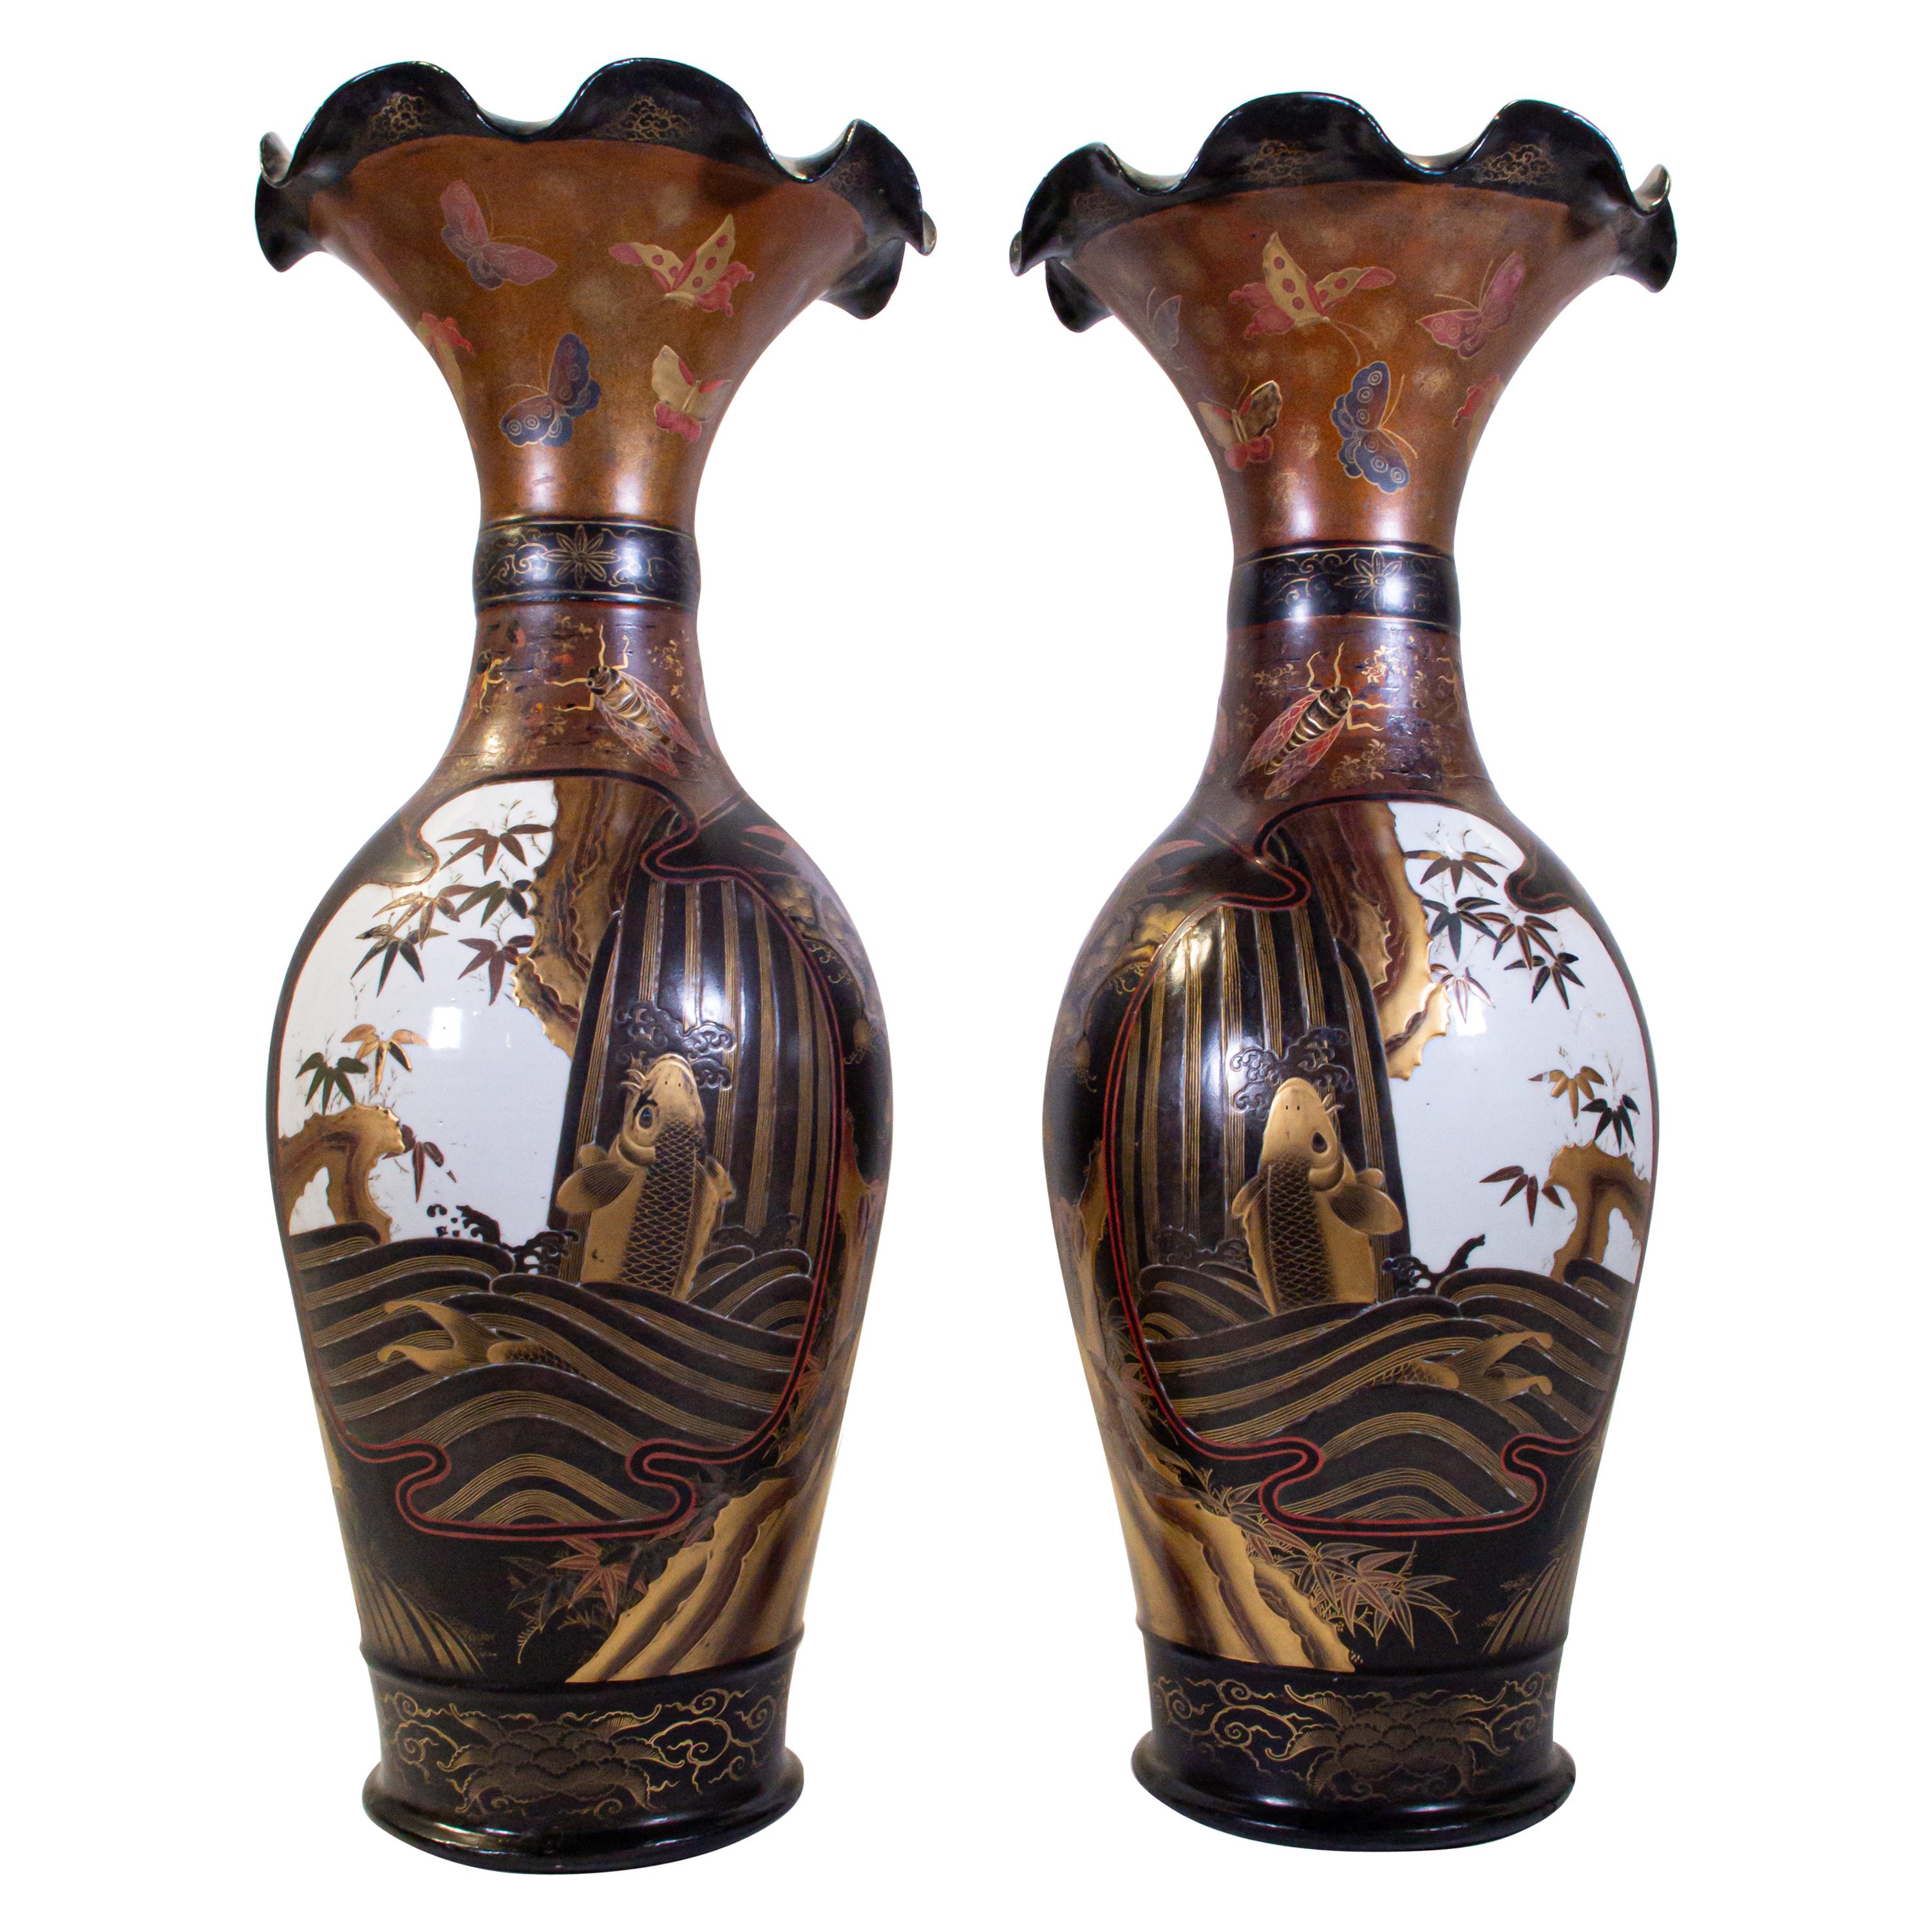 Pair of Antique 19th Century Japanese Porcelain Multicolored Lacquered Vases